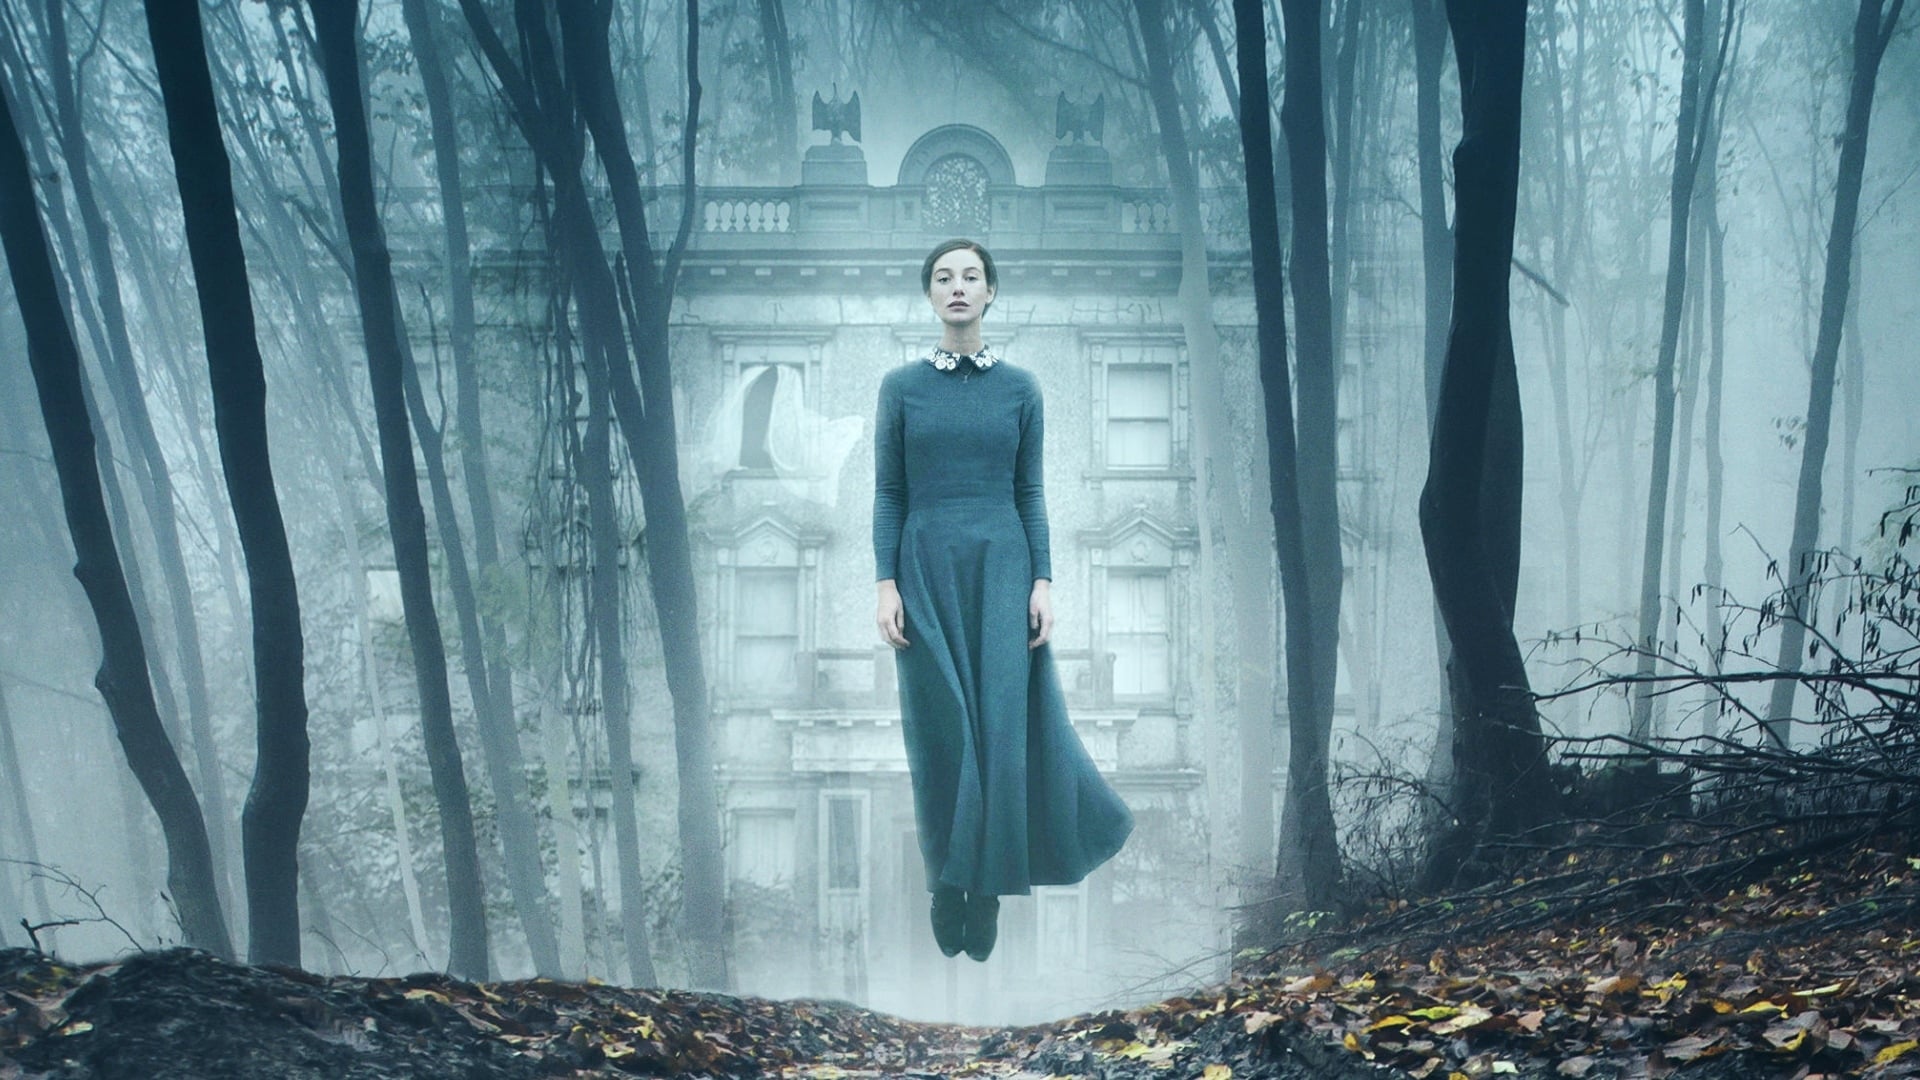 Poster Phim Luật Quỷ (The Lodgers)